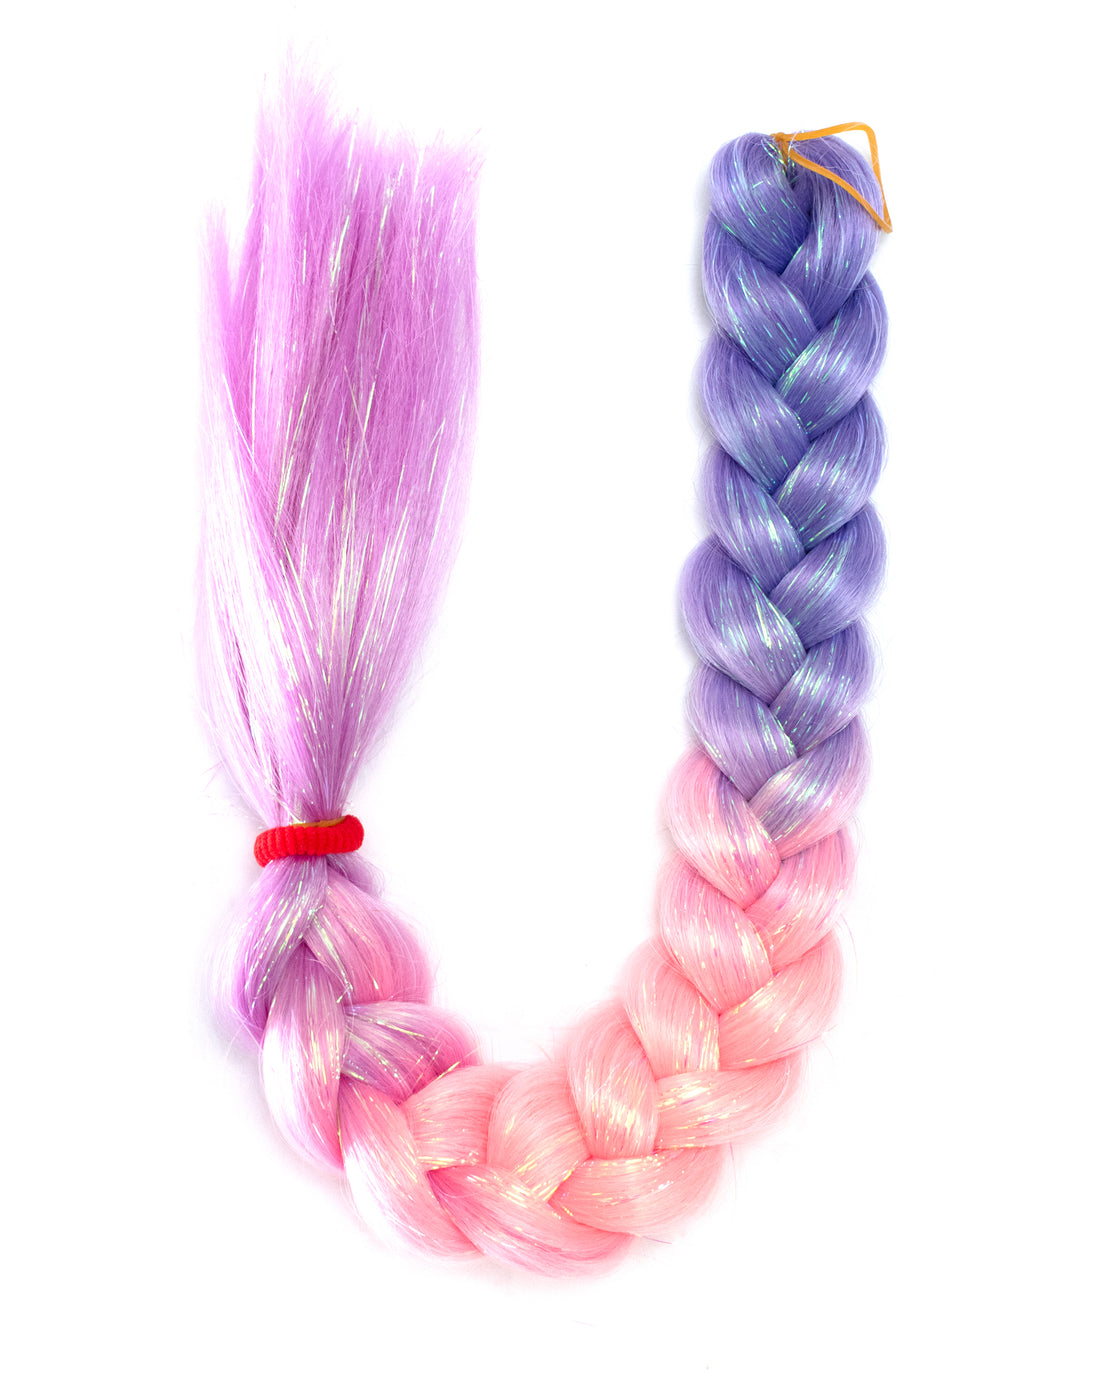 Paisley Pixie - Pastel Purple Pink Ombre Hair Extension with Tinsel - Lunautics Braid-In Hair